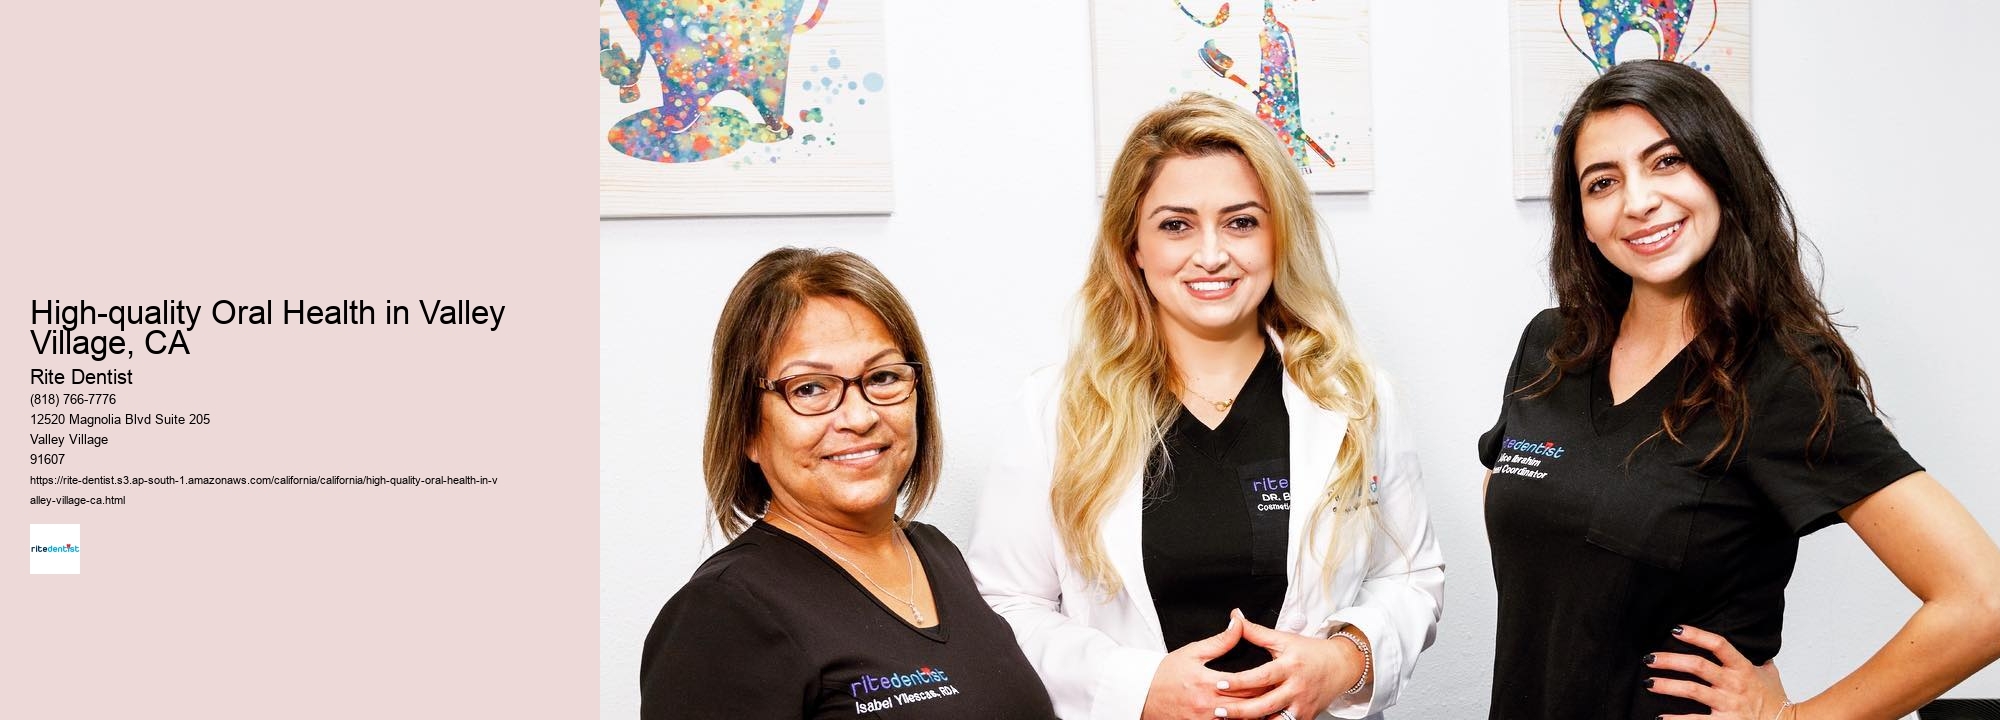 High-quality Oral Health in Valley Village, CA